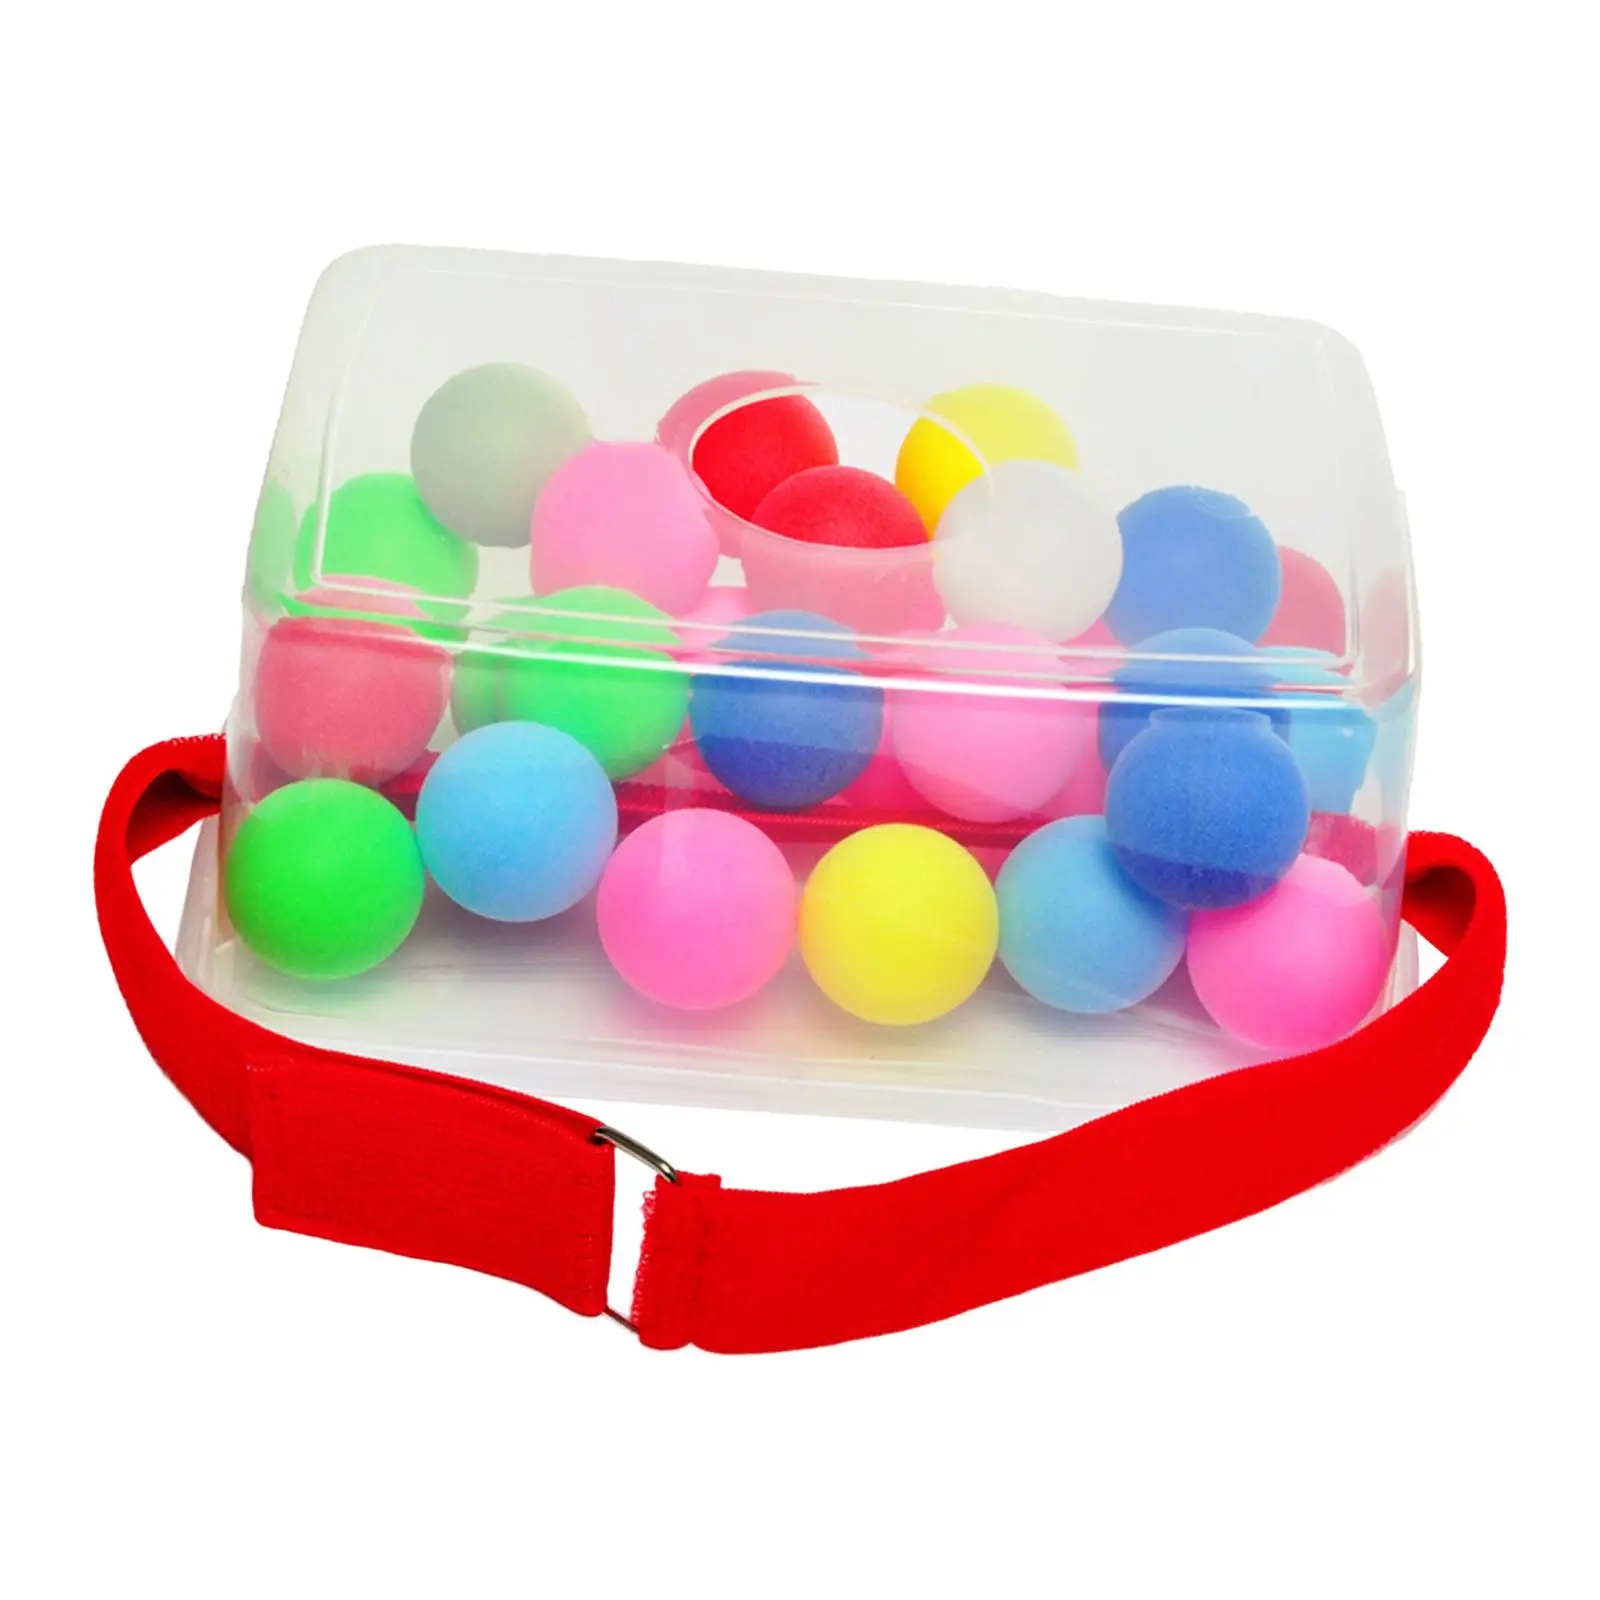 Shaking Balls Game set Swing Balls Game Competition Toys for Outdoors Family